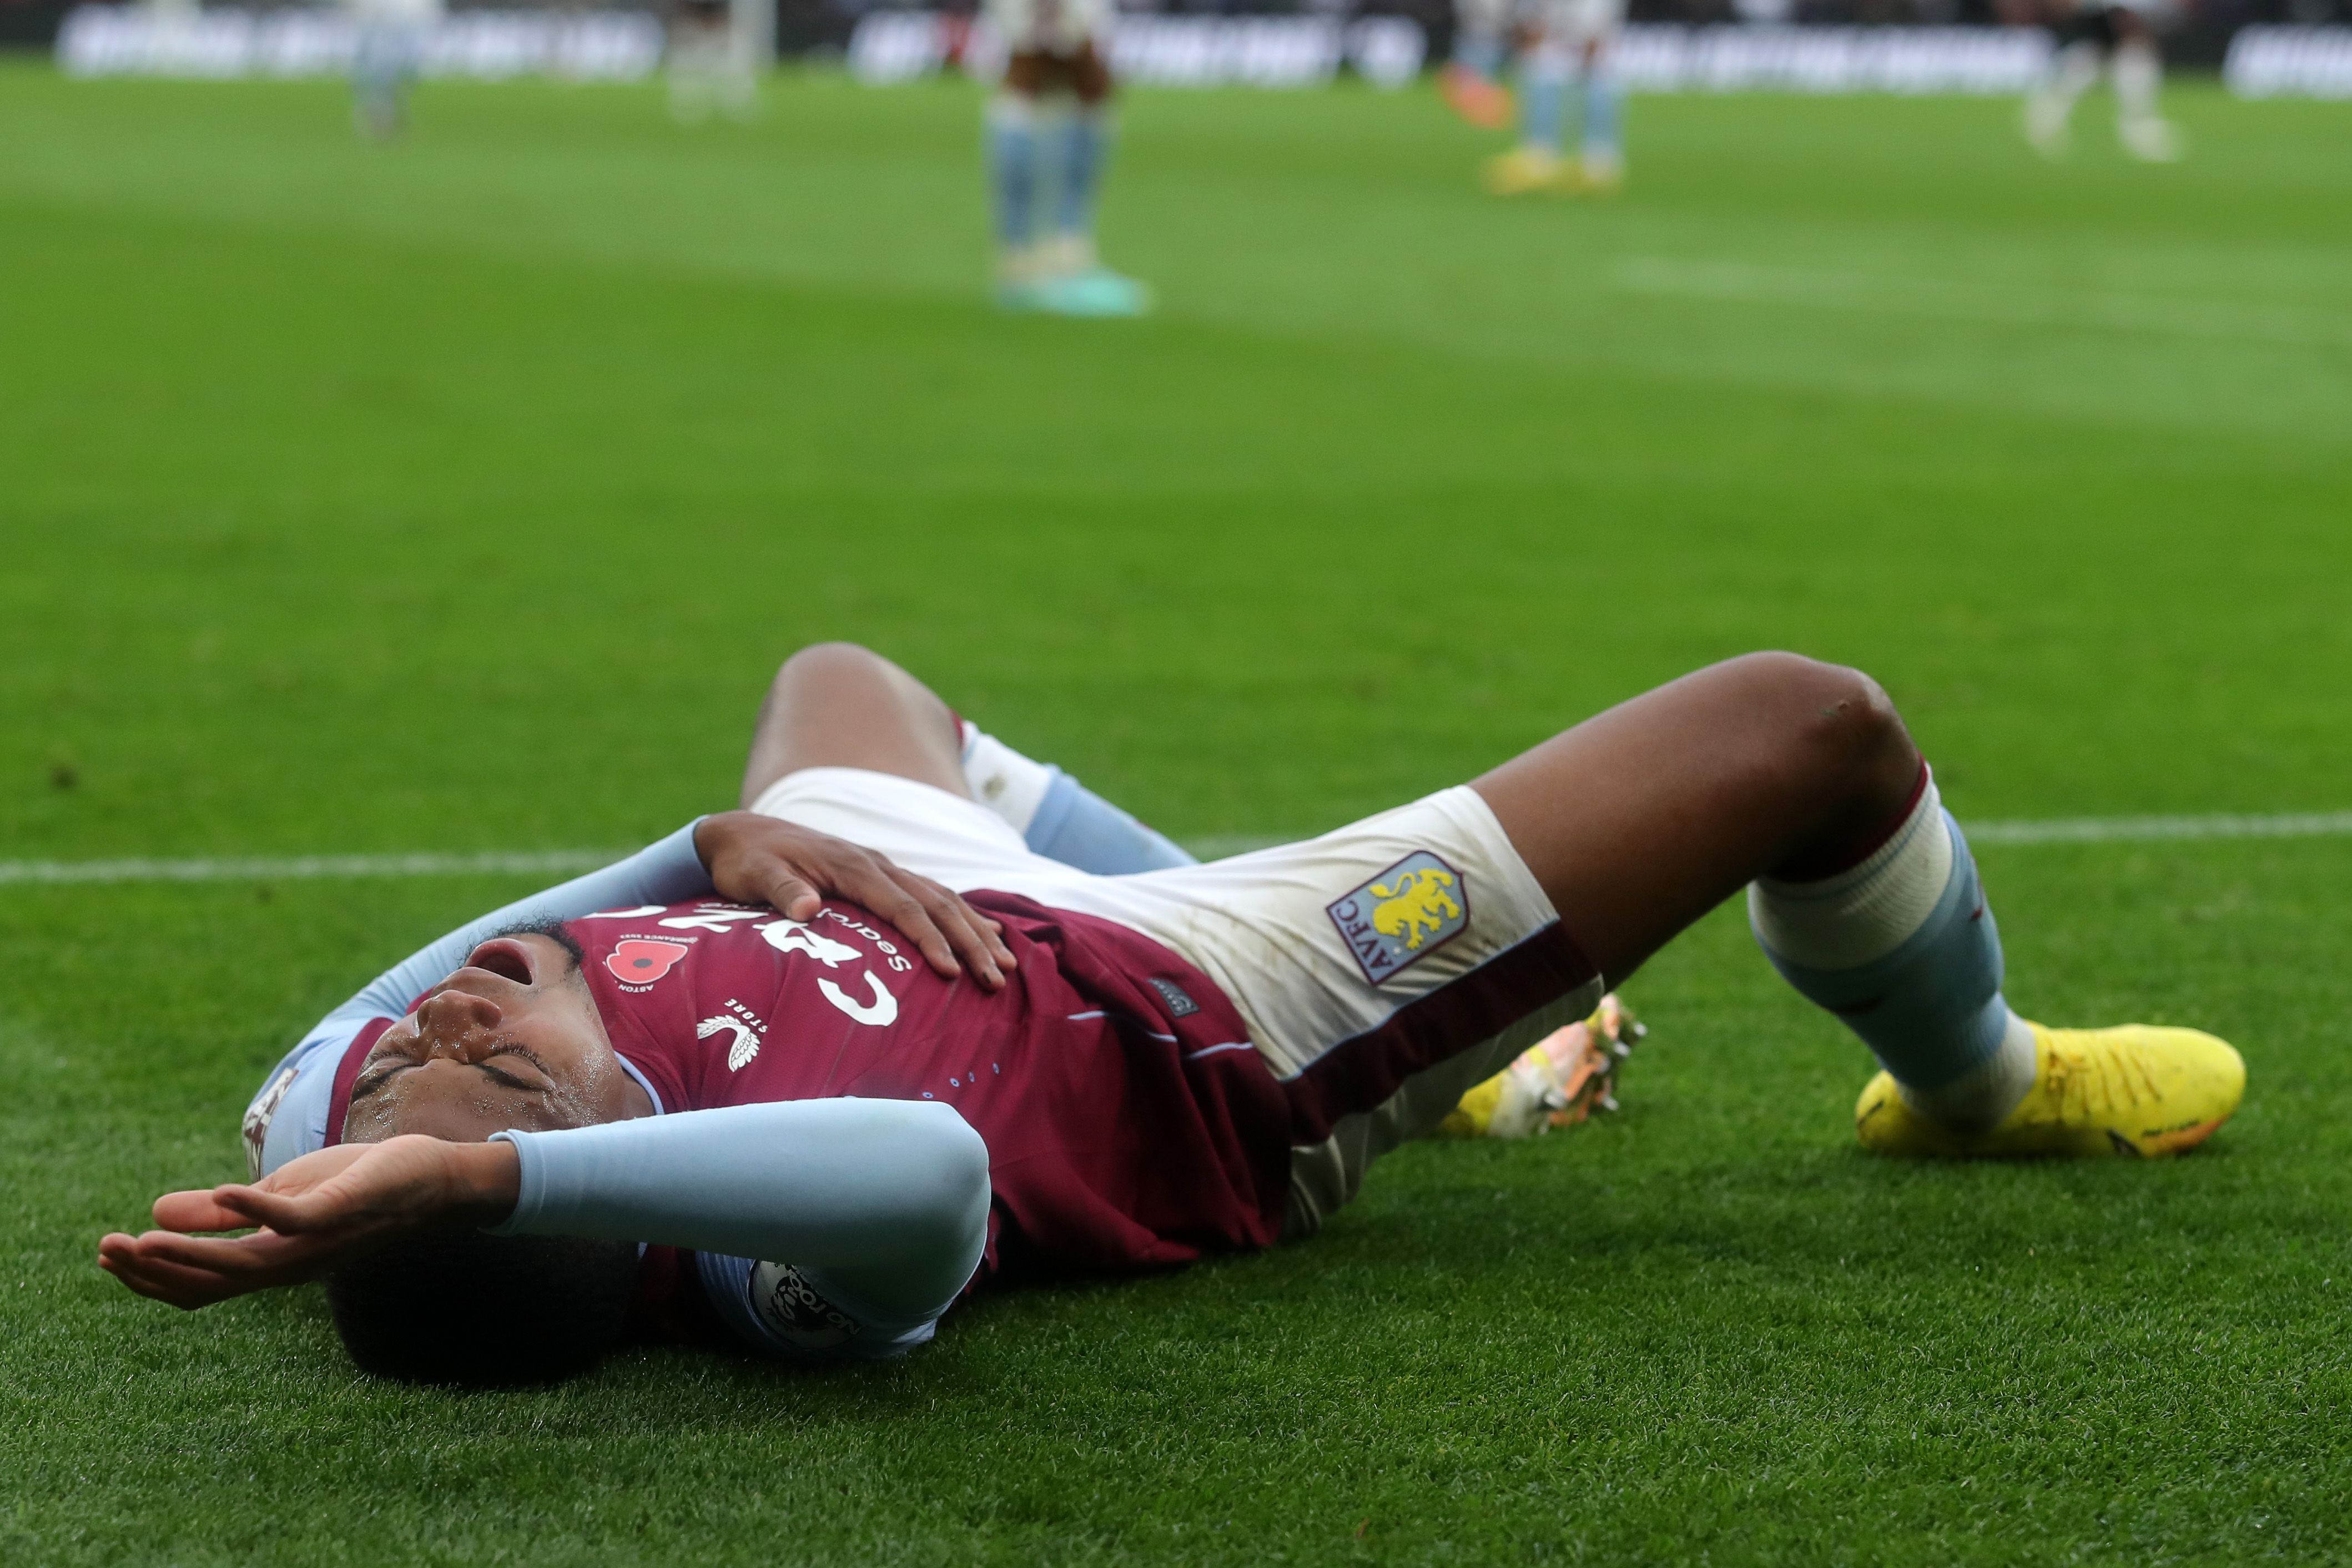 Aston Villa's Leon Bailey goes down with an injury